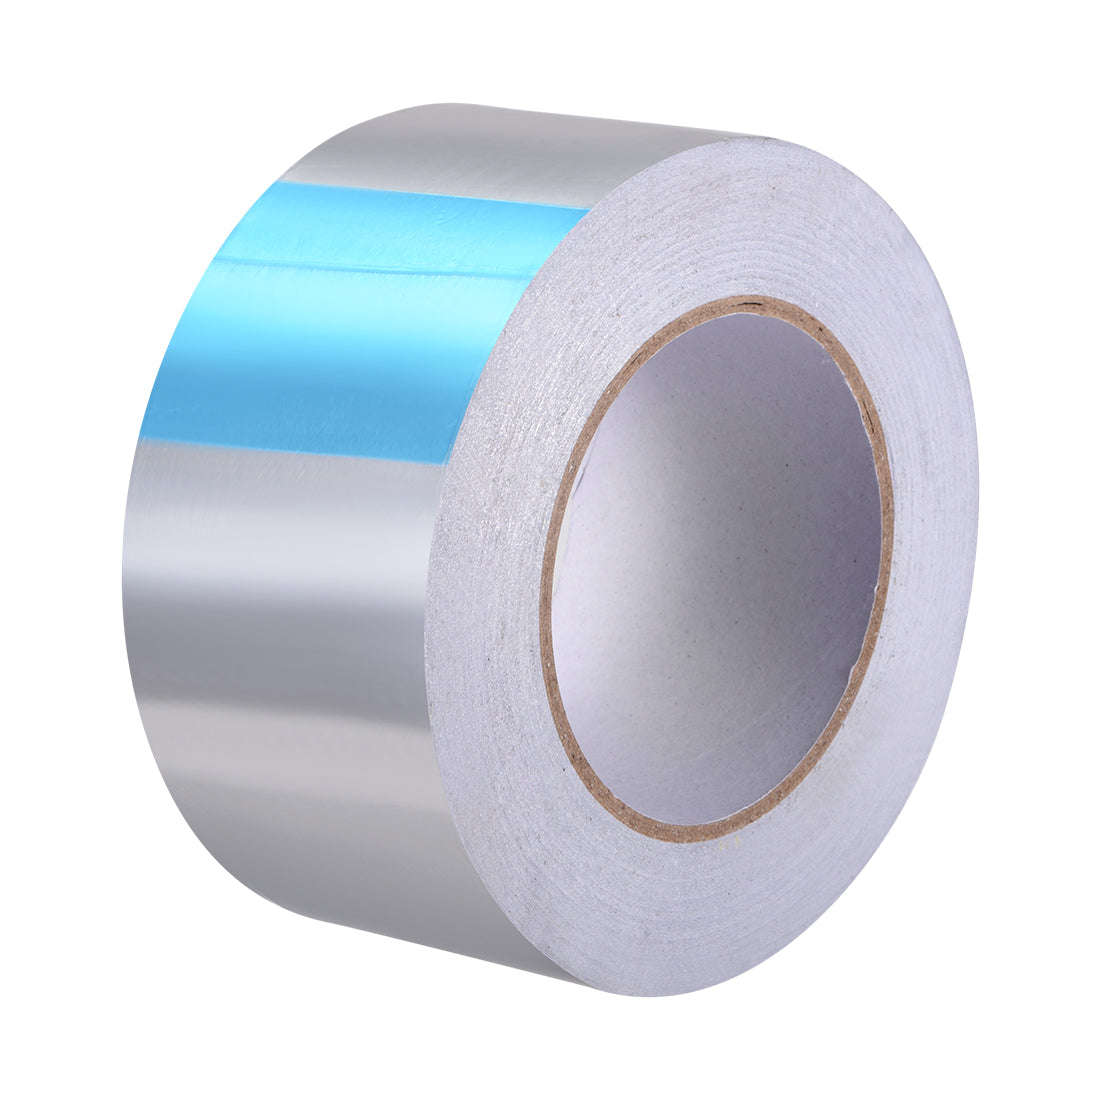 uxcell Uxcell Heat Resistant Tape - High Temperature Heat Transfer Tape Aluminum Foil Adhesive Tape 60mm x 50m(164ft)